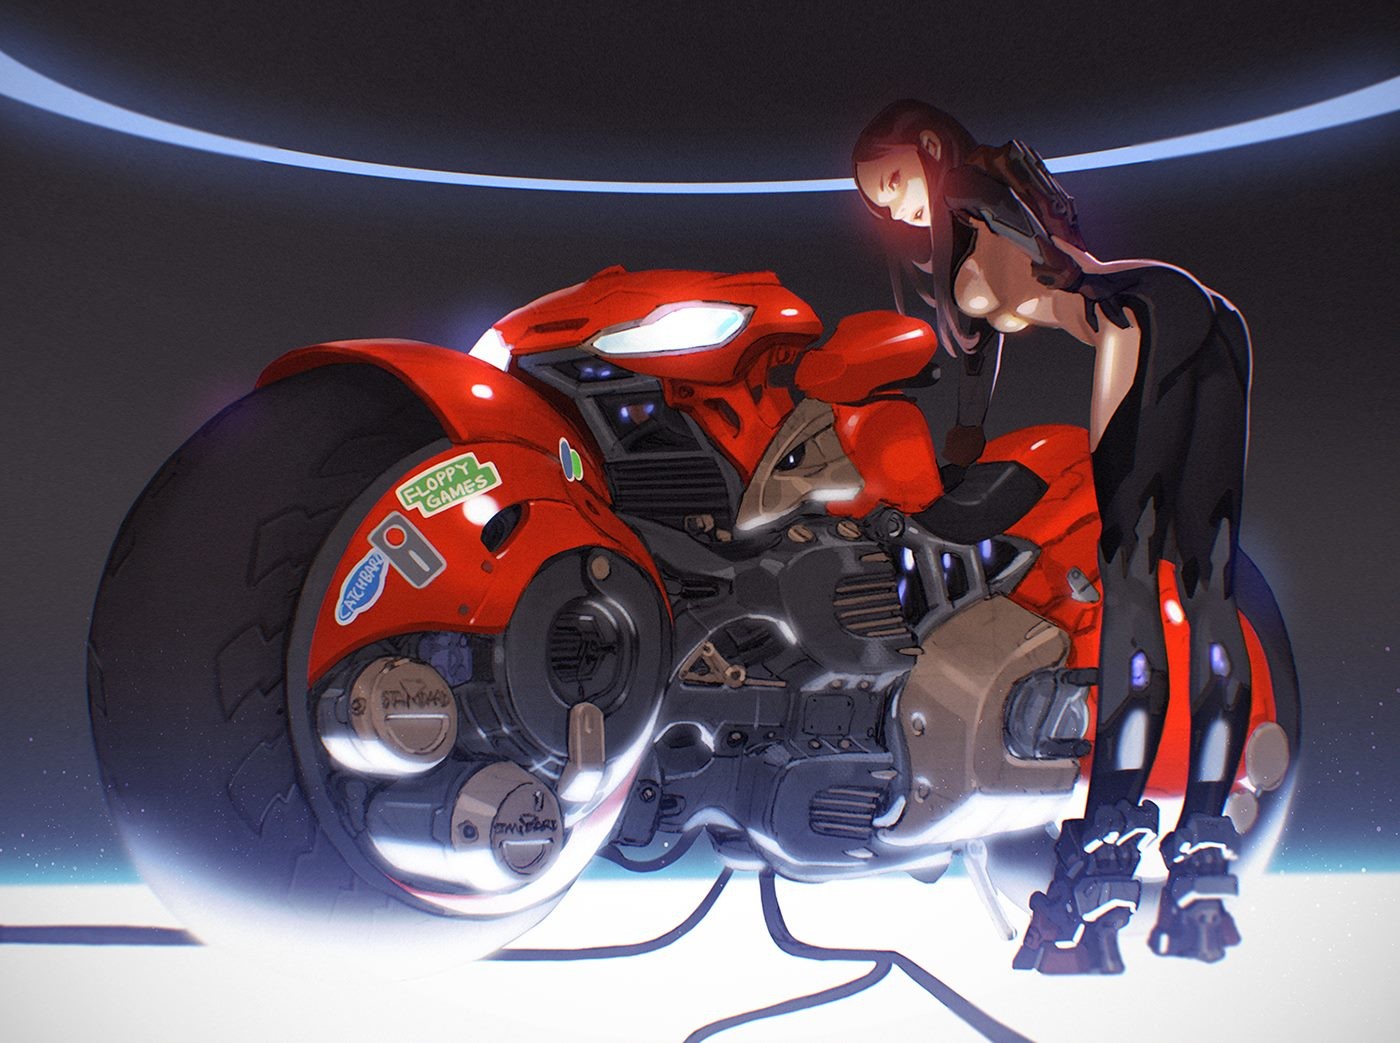 Red Motorbike by Sunkist Lee Fucking Pics Hq